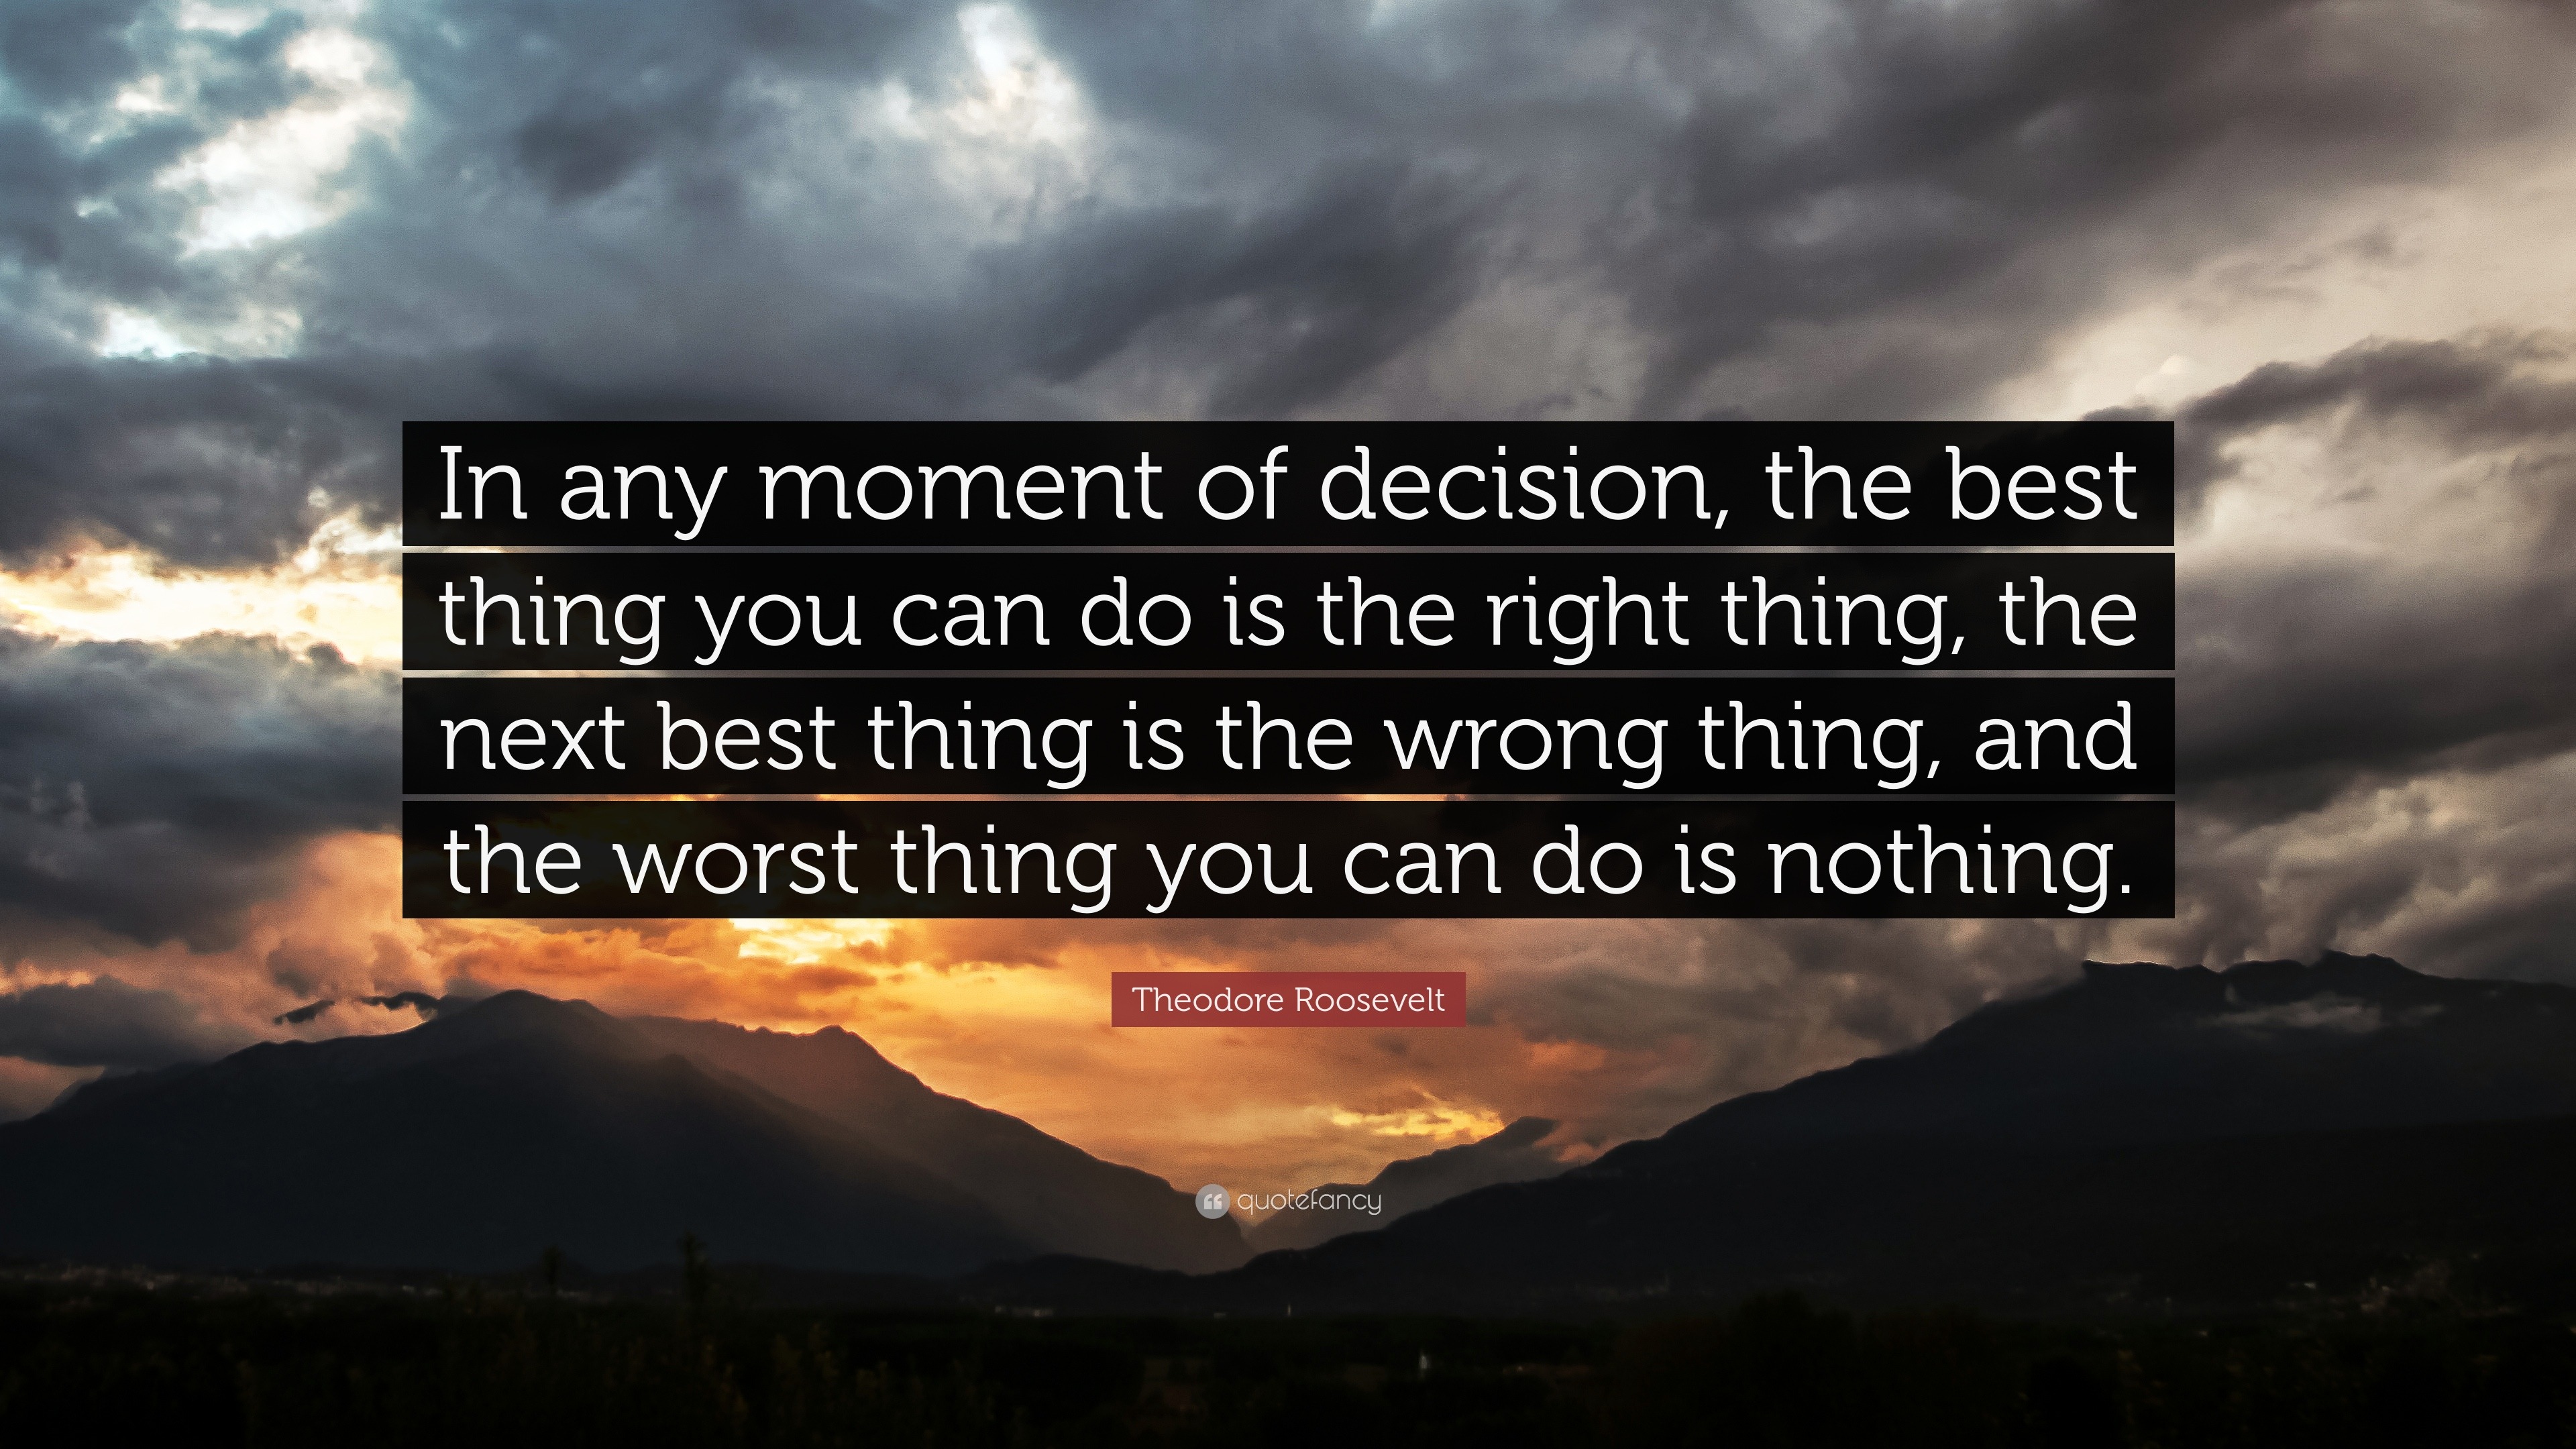 Theodore Roosevelt Quote: “In any moment of decision, the best thing